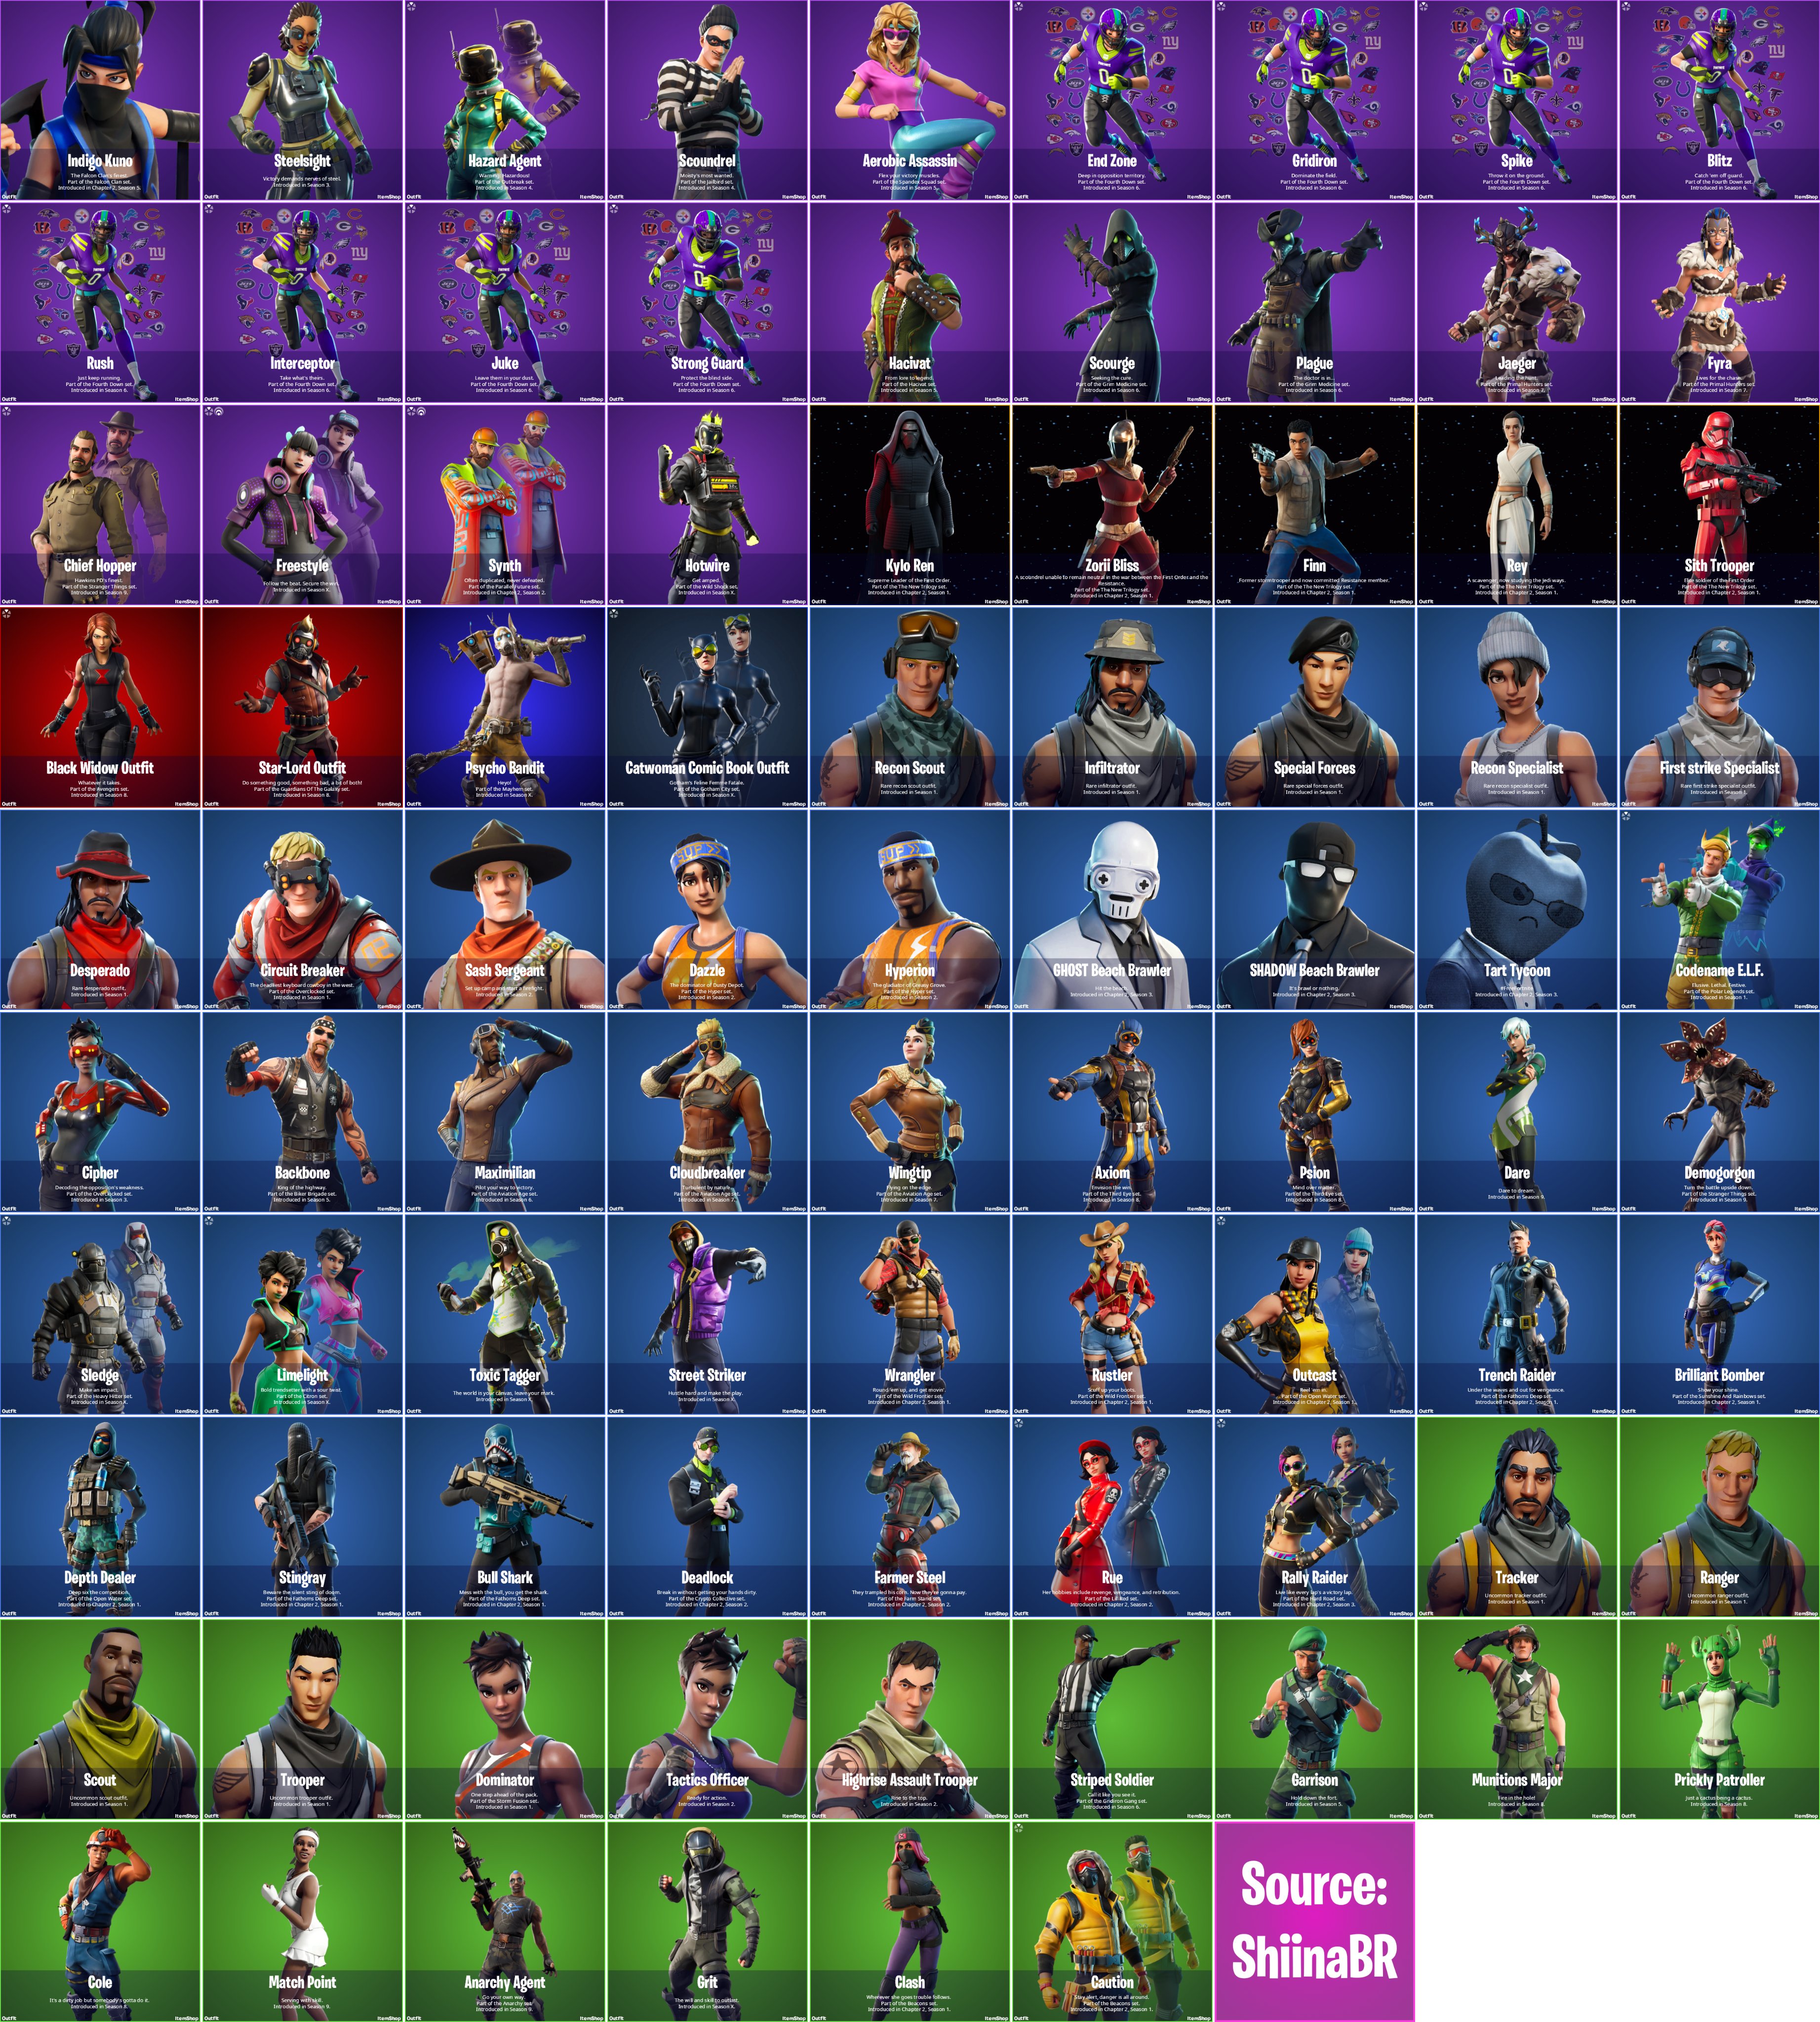 Shiina These Are All Skins That Do Not Have An Updated Item Shop Image In V16 40 I Updated This Post From V16 30 And Removed Skins Like Twitch Prime Skins